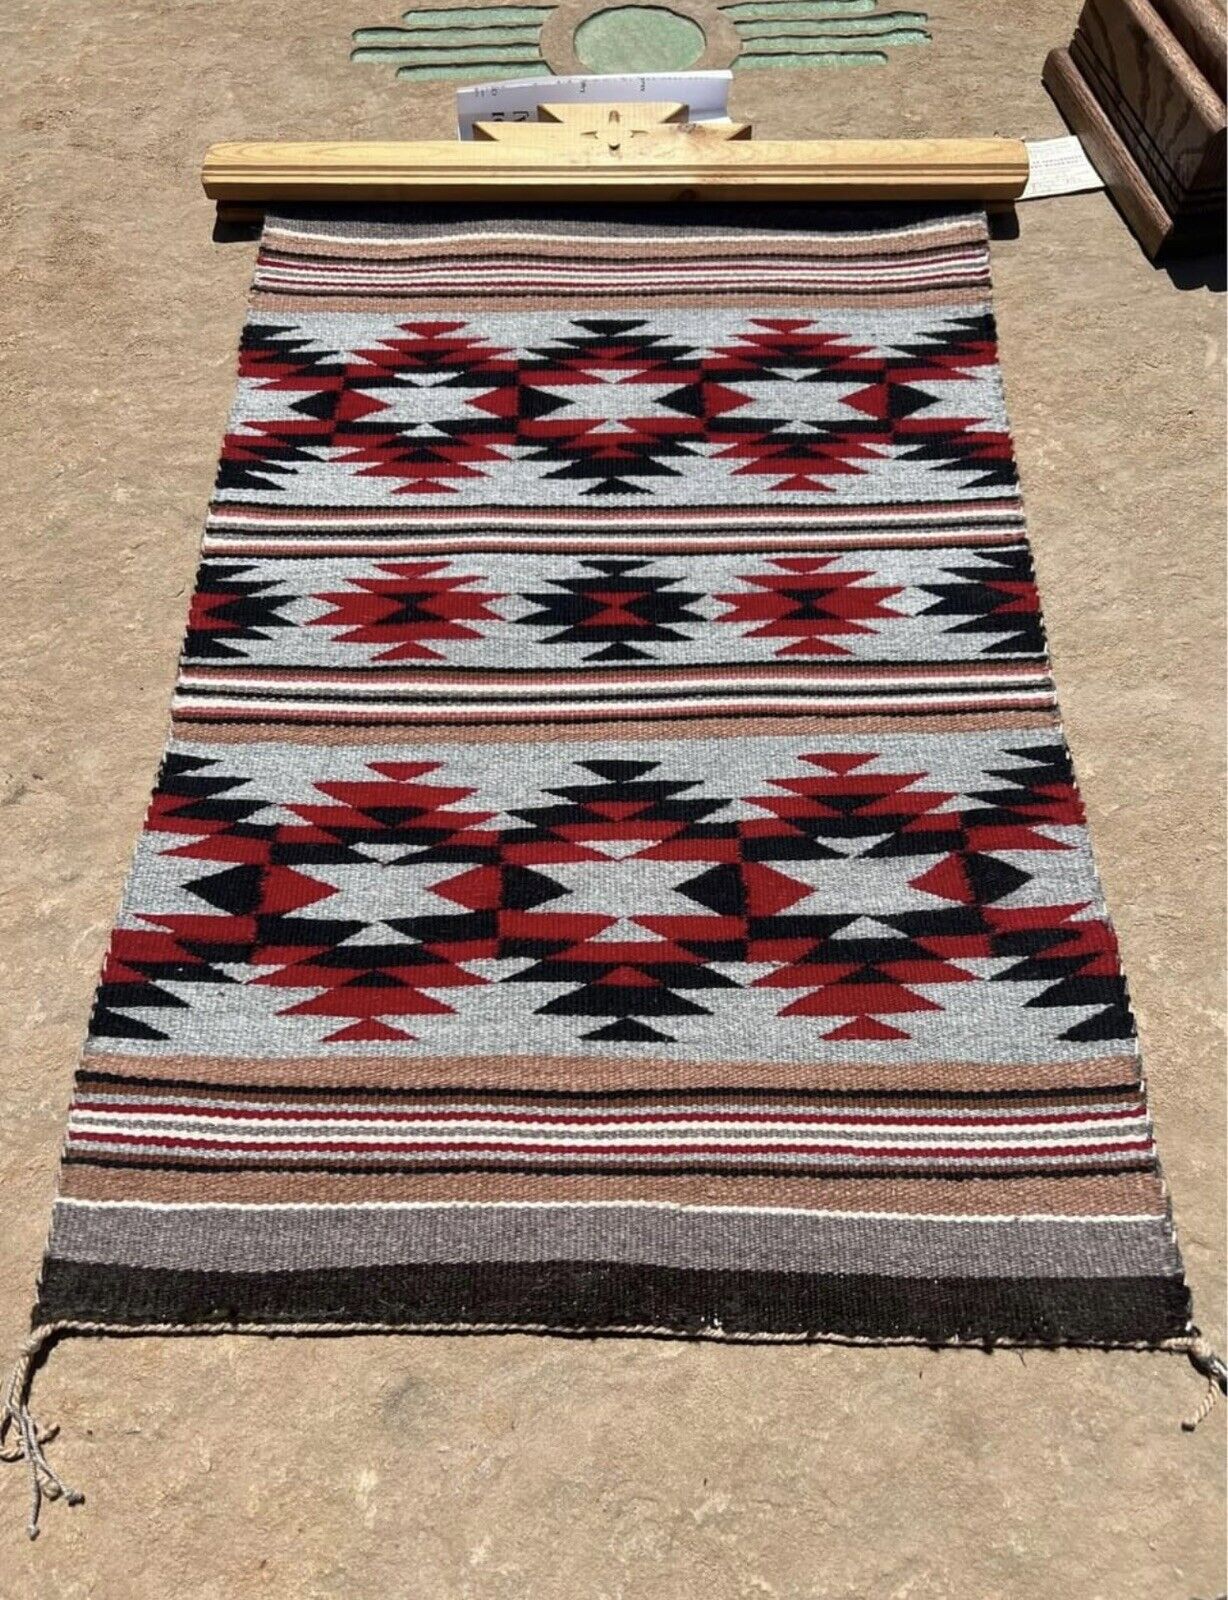 Collectable Authentic Native American Navajo, Rug by Marie Nez Hubbell Trading